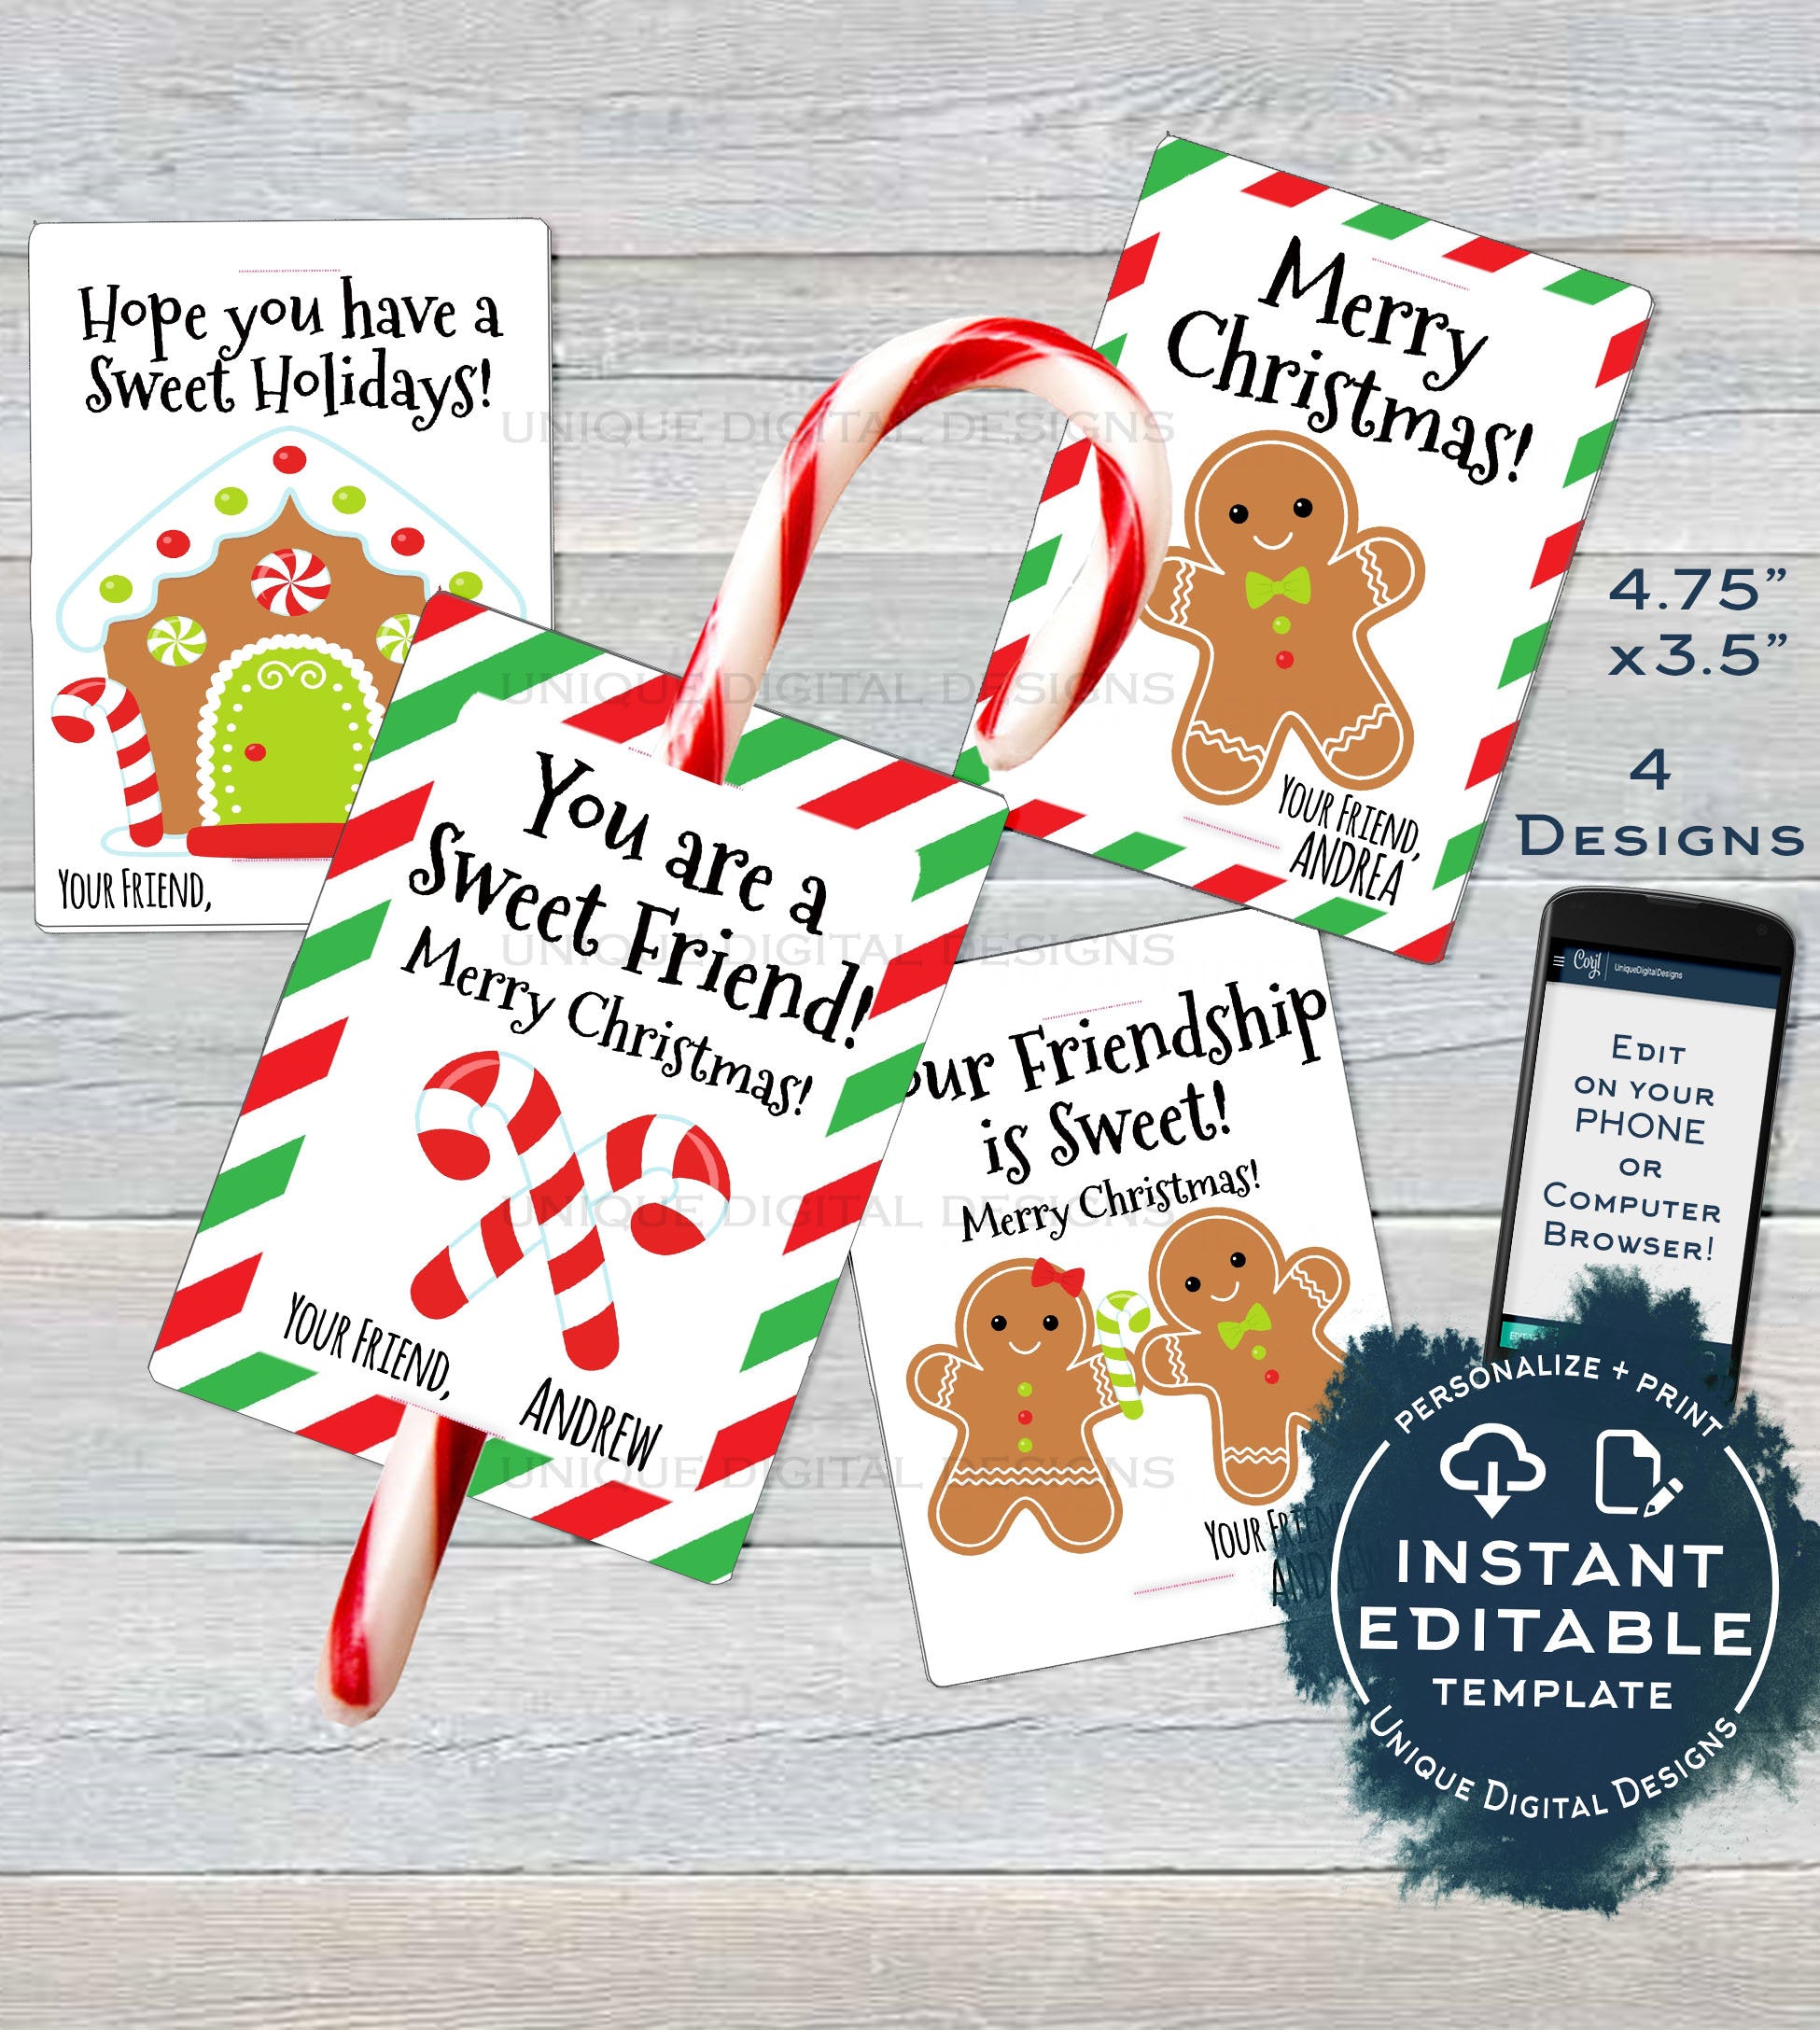 holiday gift tags for kids